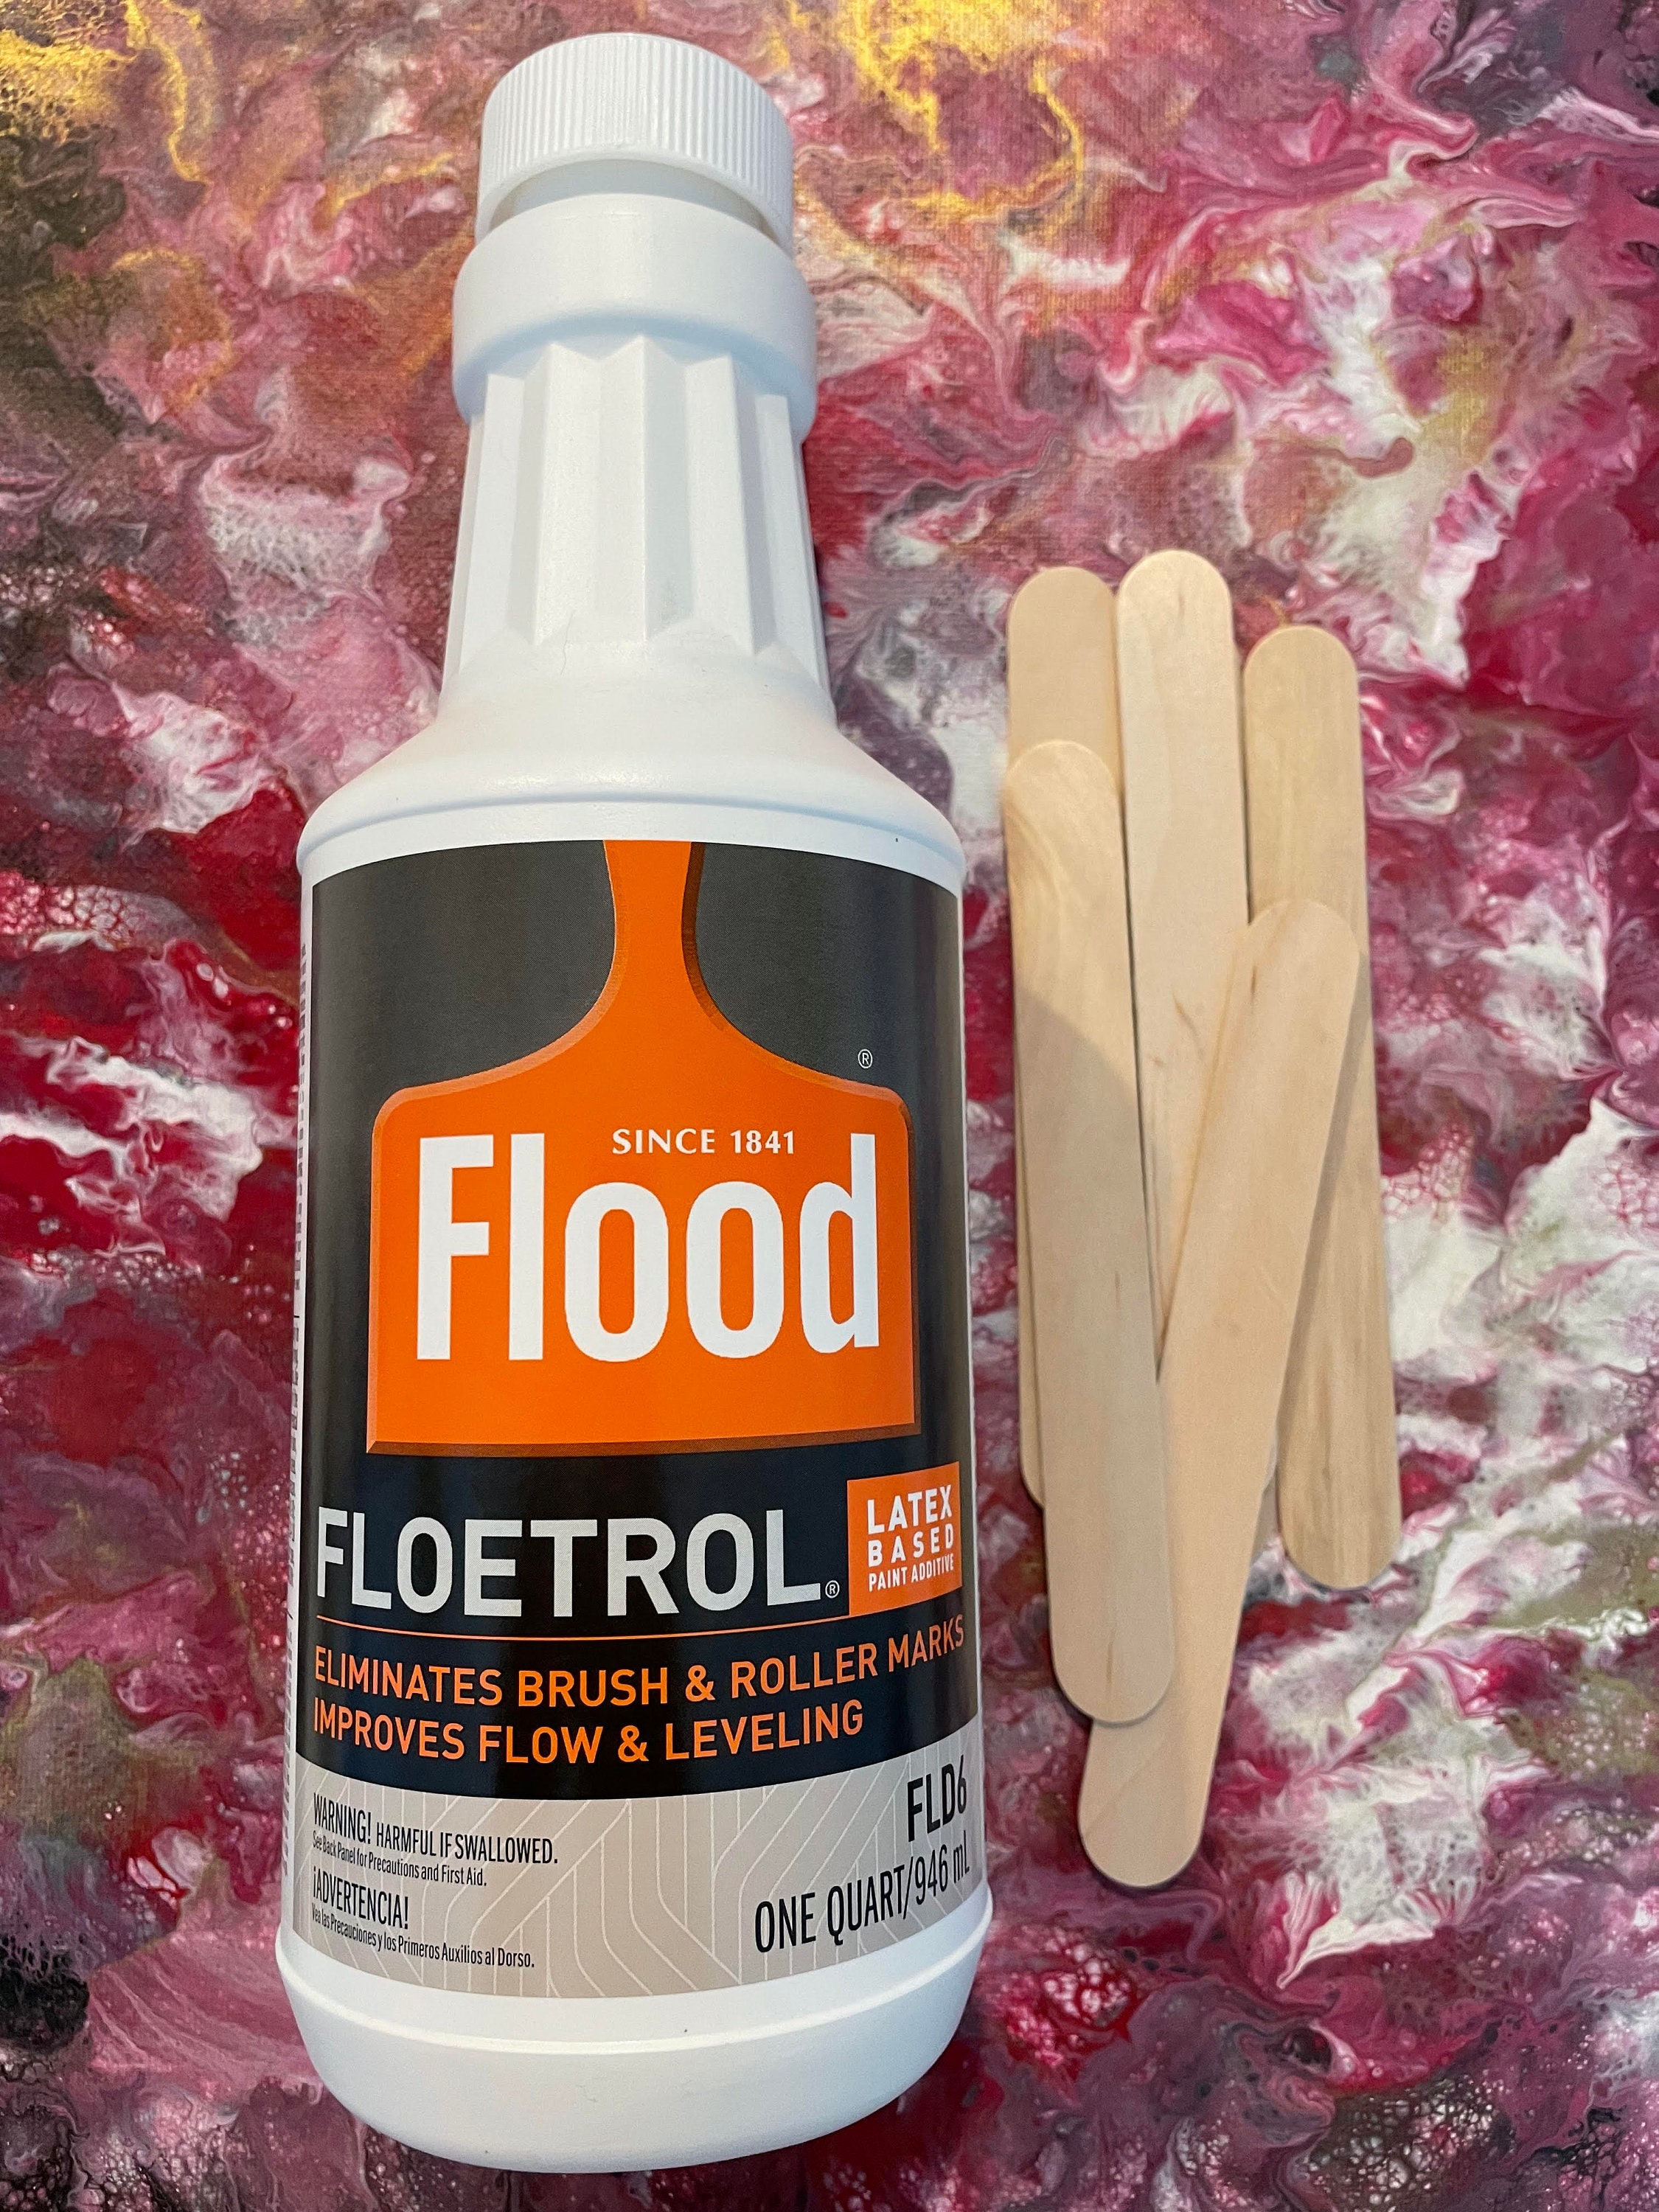 SHOPUS  Floetrol For Acrylic Paint Pouring Kit, Flotrol Acrylic Pour Medium  Additive, 16 Acrylic Pouring Paints, 20 Pixiss Wood Mixing Sticks